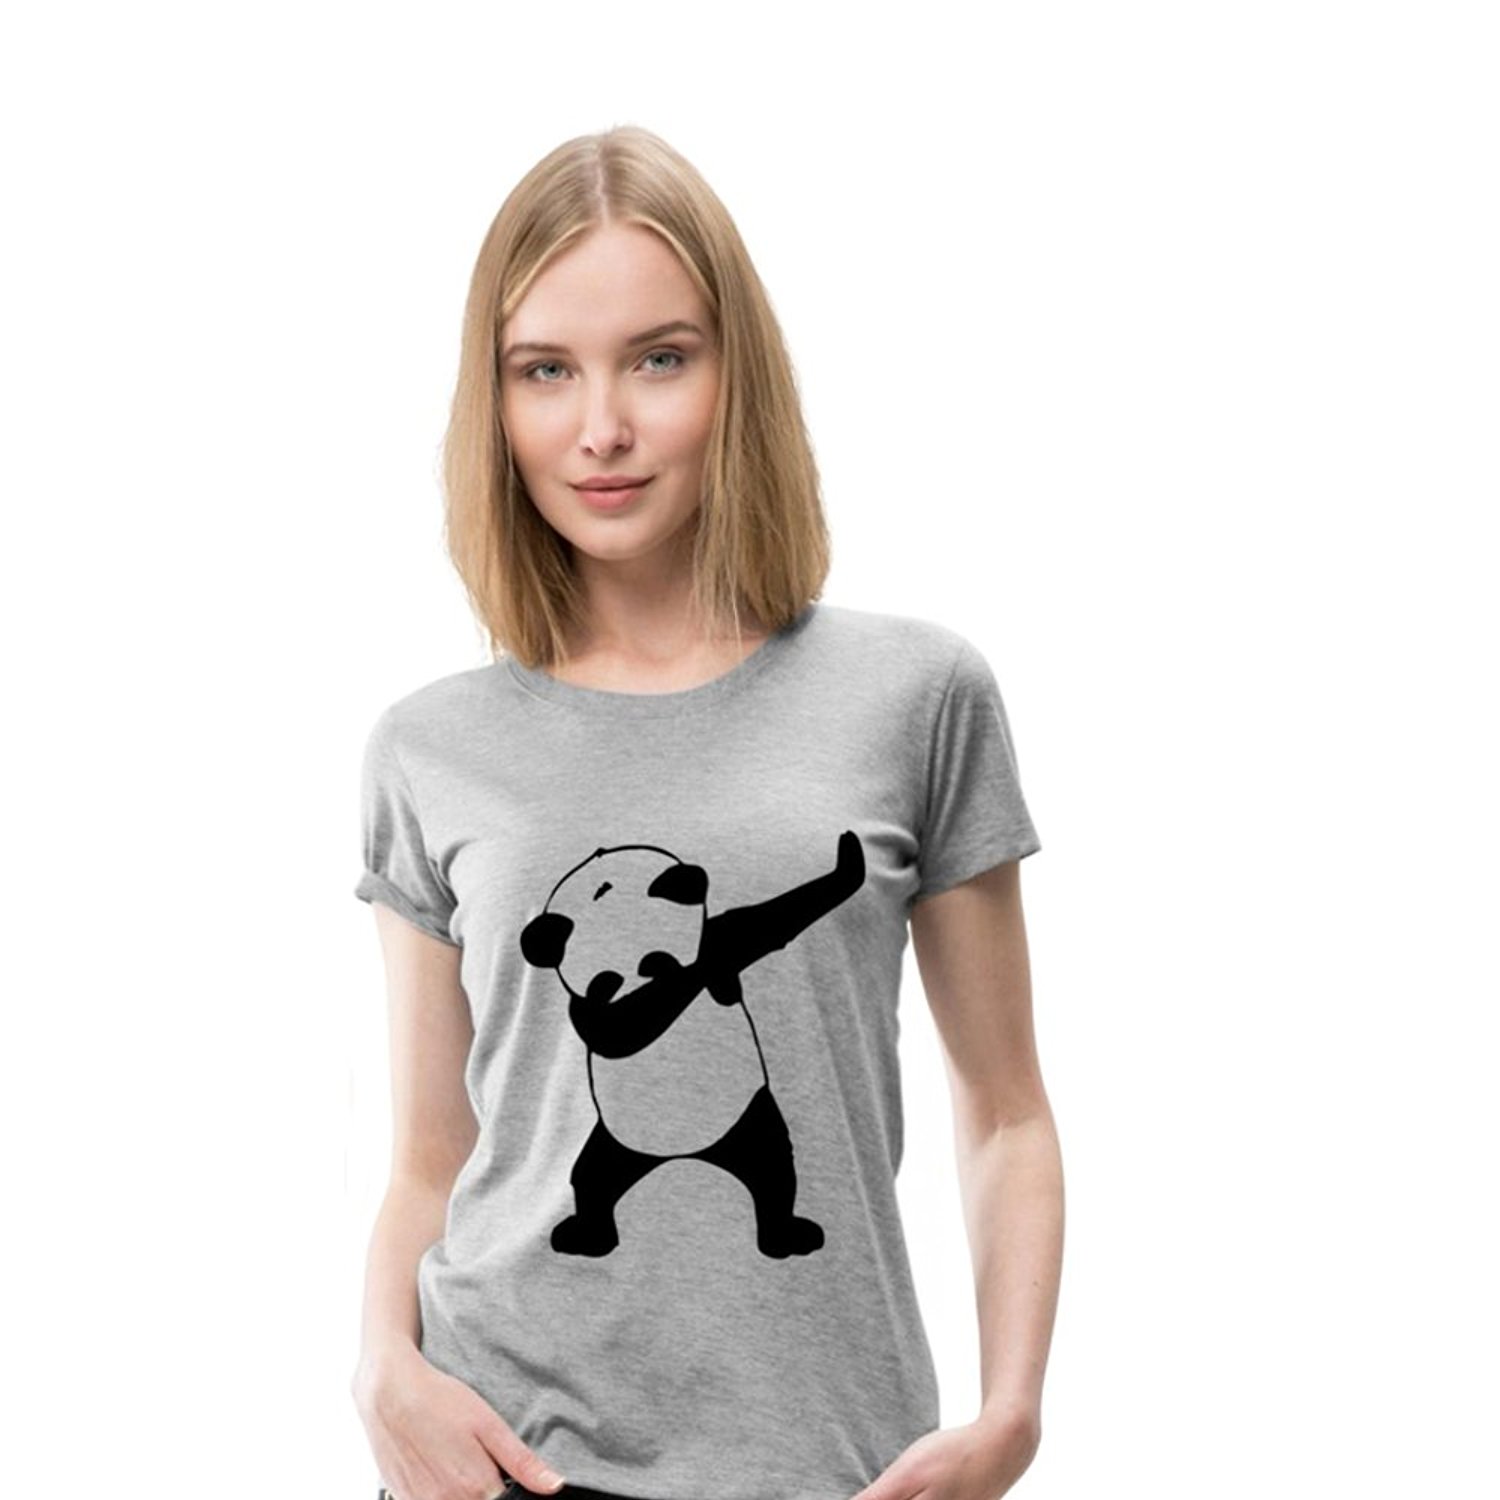 Round neck panda print t-shirts for woman and men's